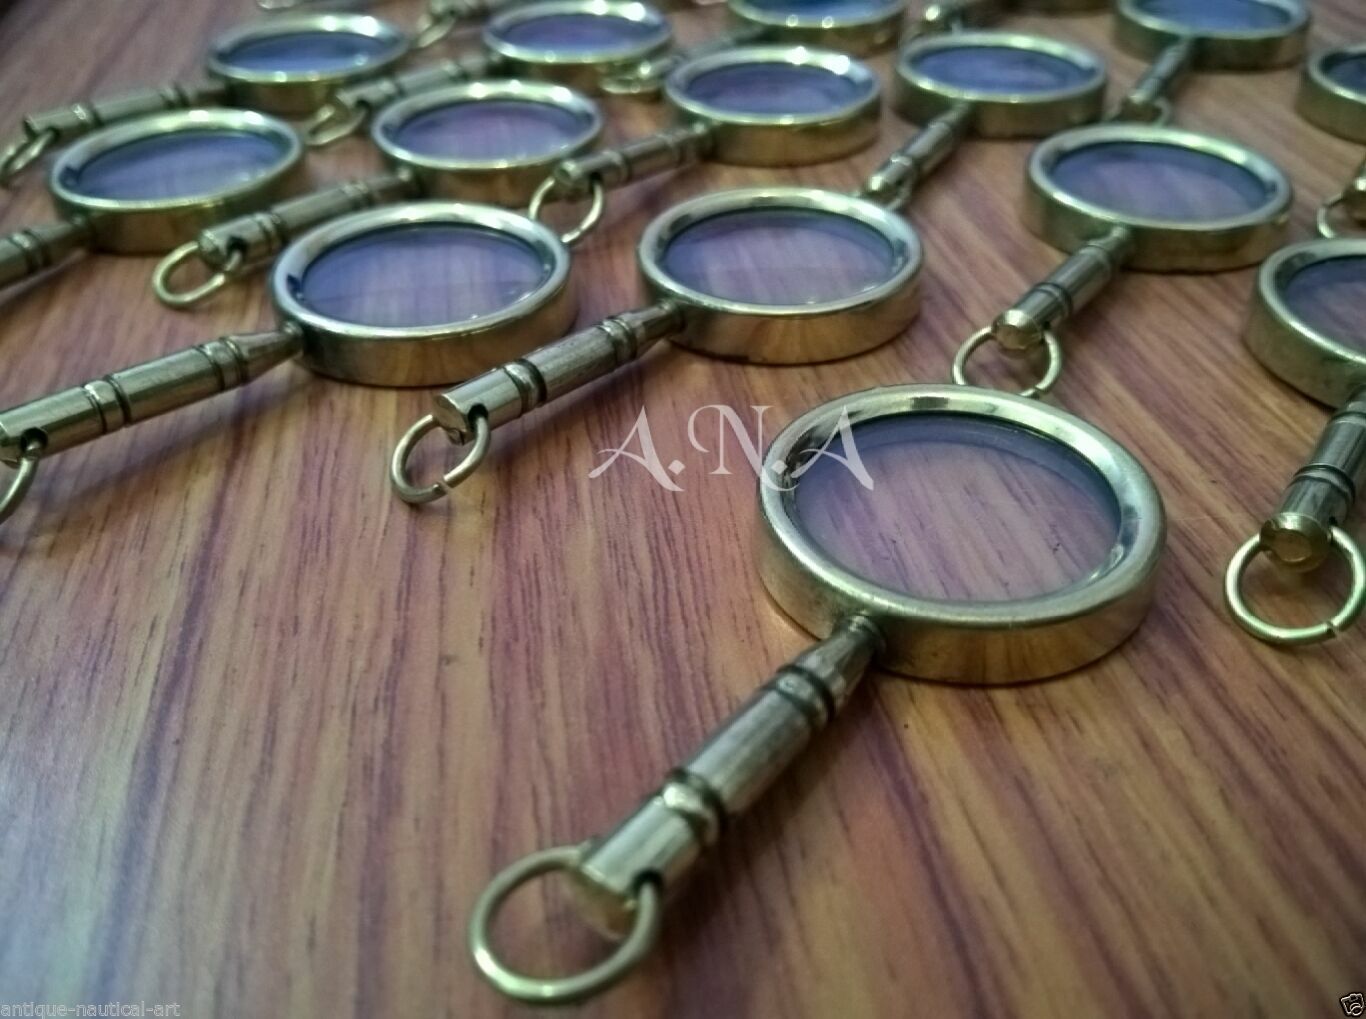 Lot Of 20 Pcs Brass Vintage Magnifier Key chain Collectible Magnifying Key Ring  Без бренда - фотография #2